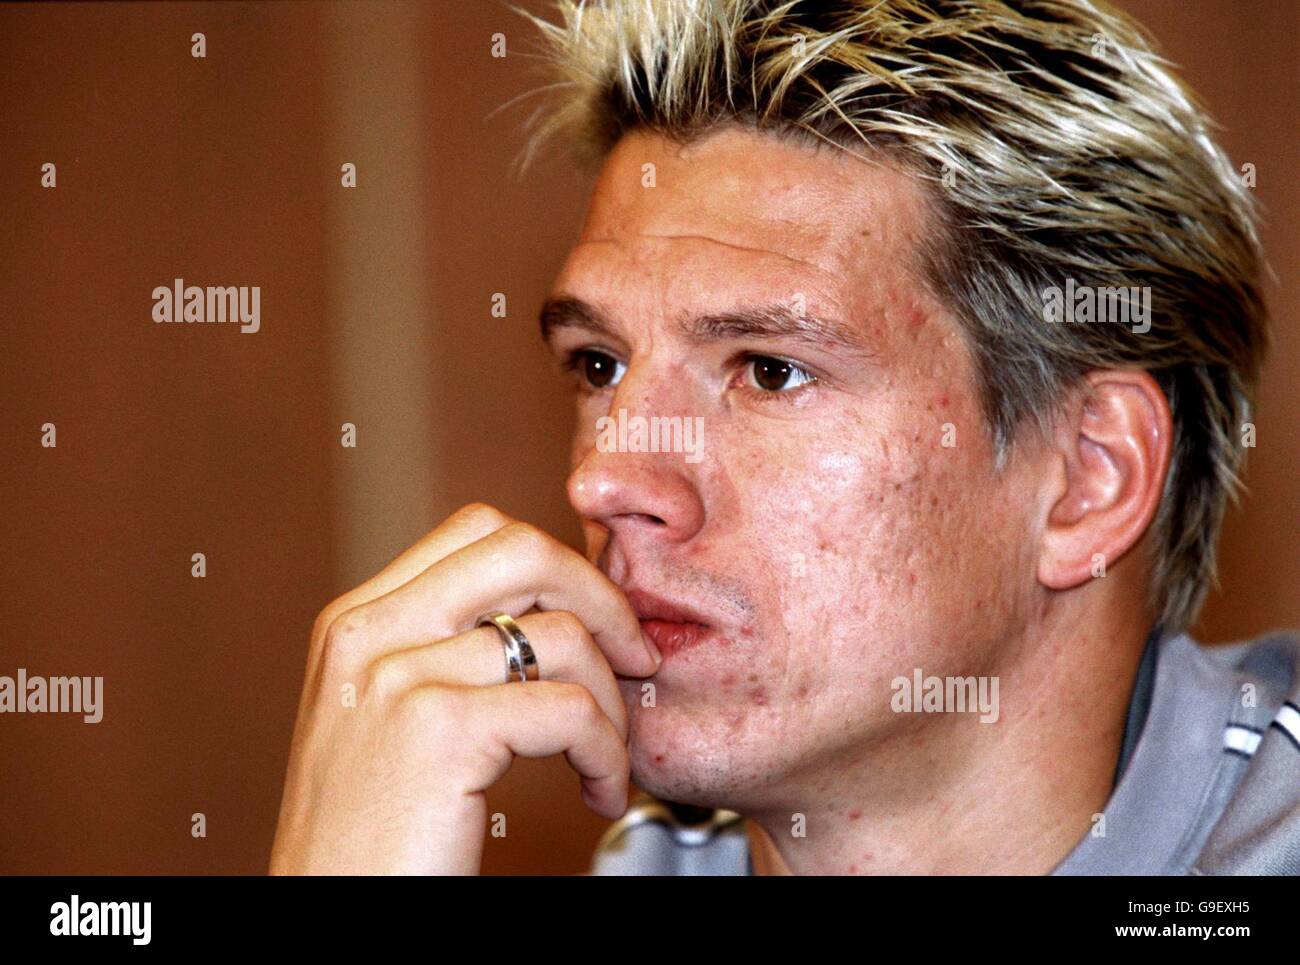 Soccer - World Cup 2002 Qualifier - Group Nine - England v Germany - Germany Press Conference. Christian Ziege, Germany Stock Photo